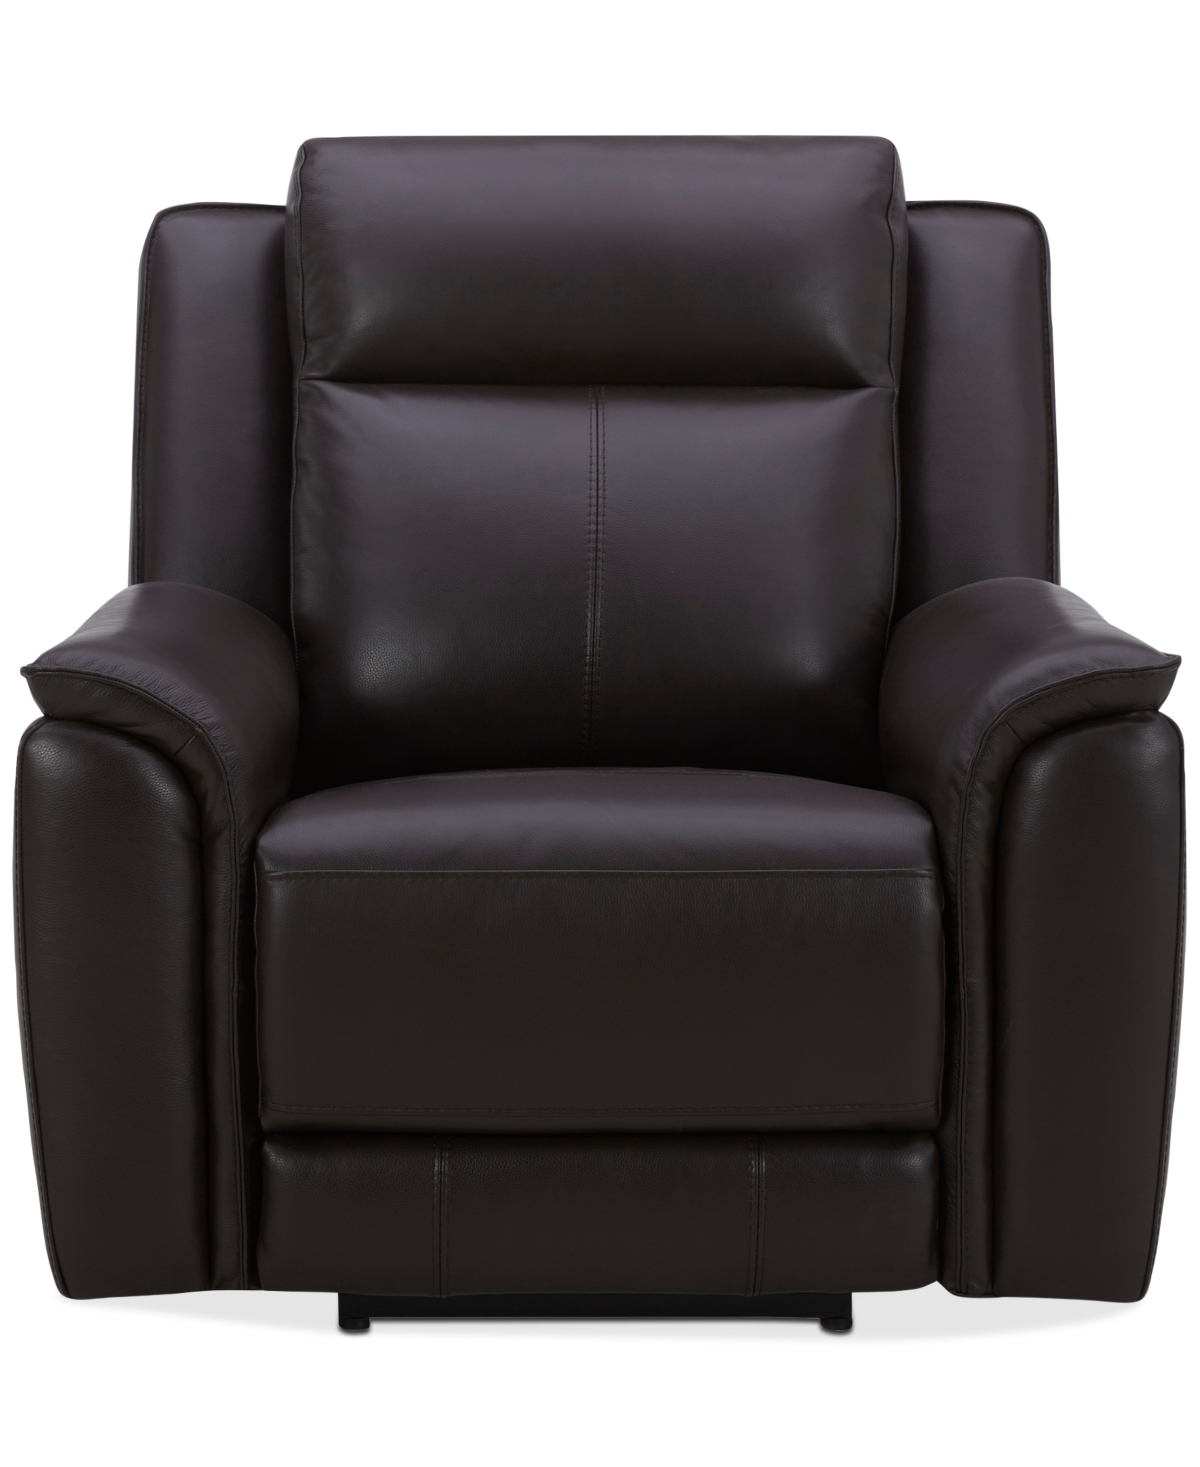 Macy's Addyson 41" Zero Gravity Leather Recliner With Power Headrest, Created For  In Chocolate